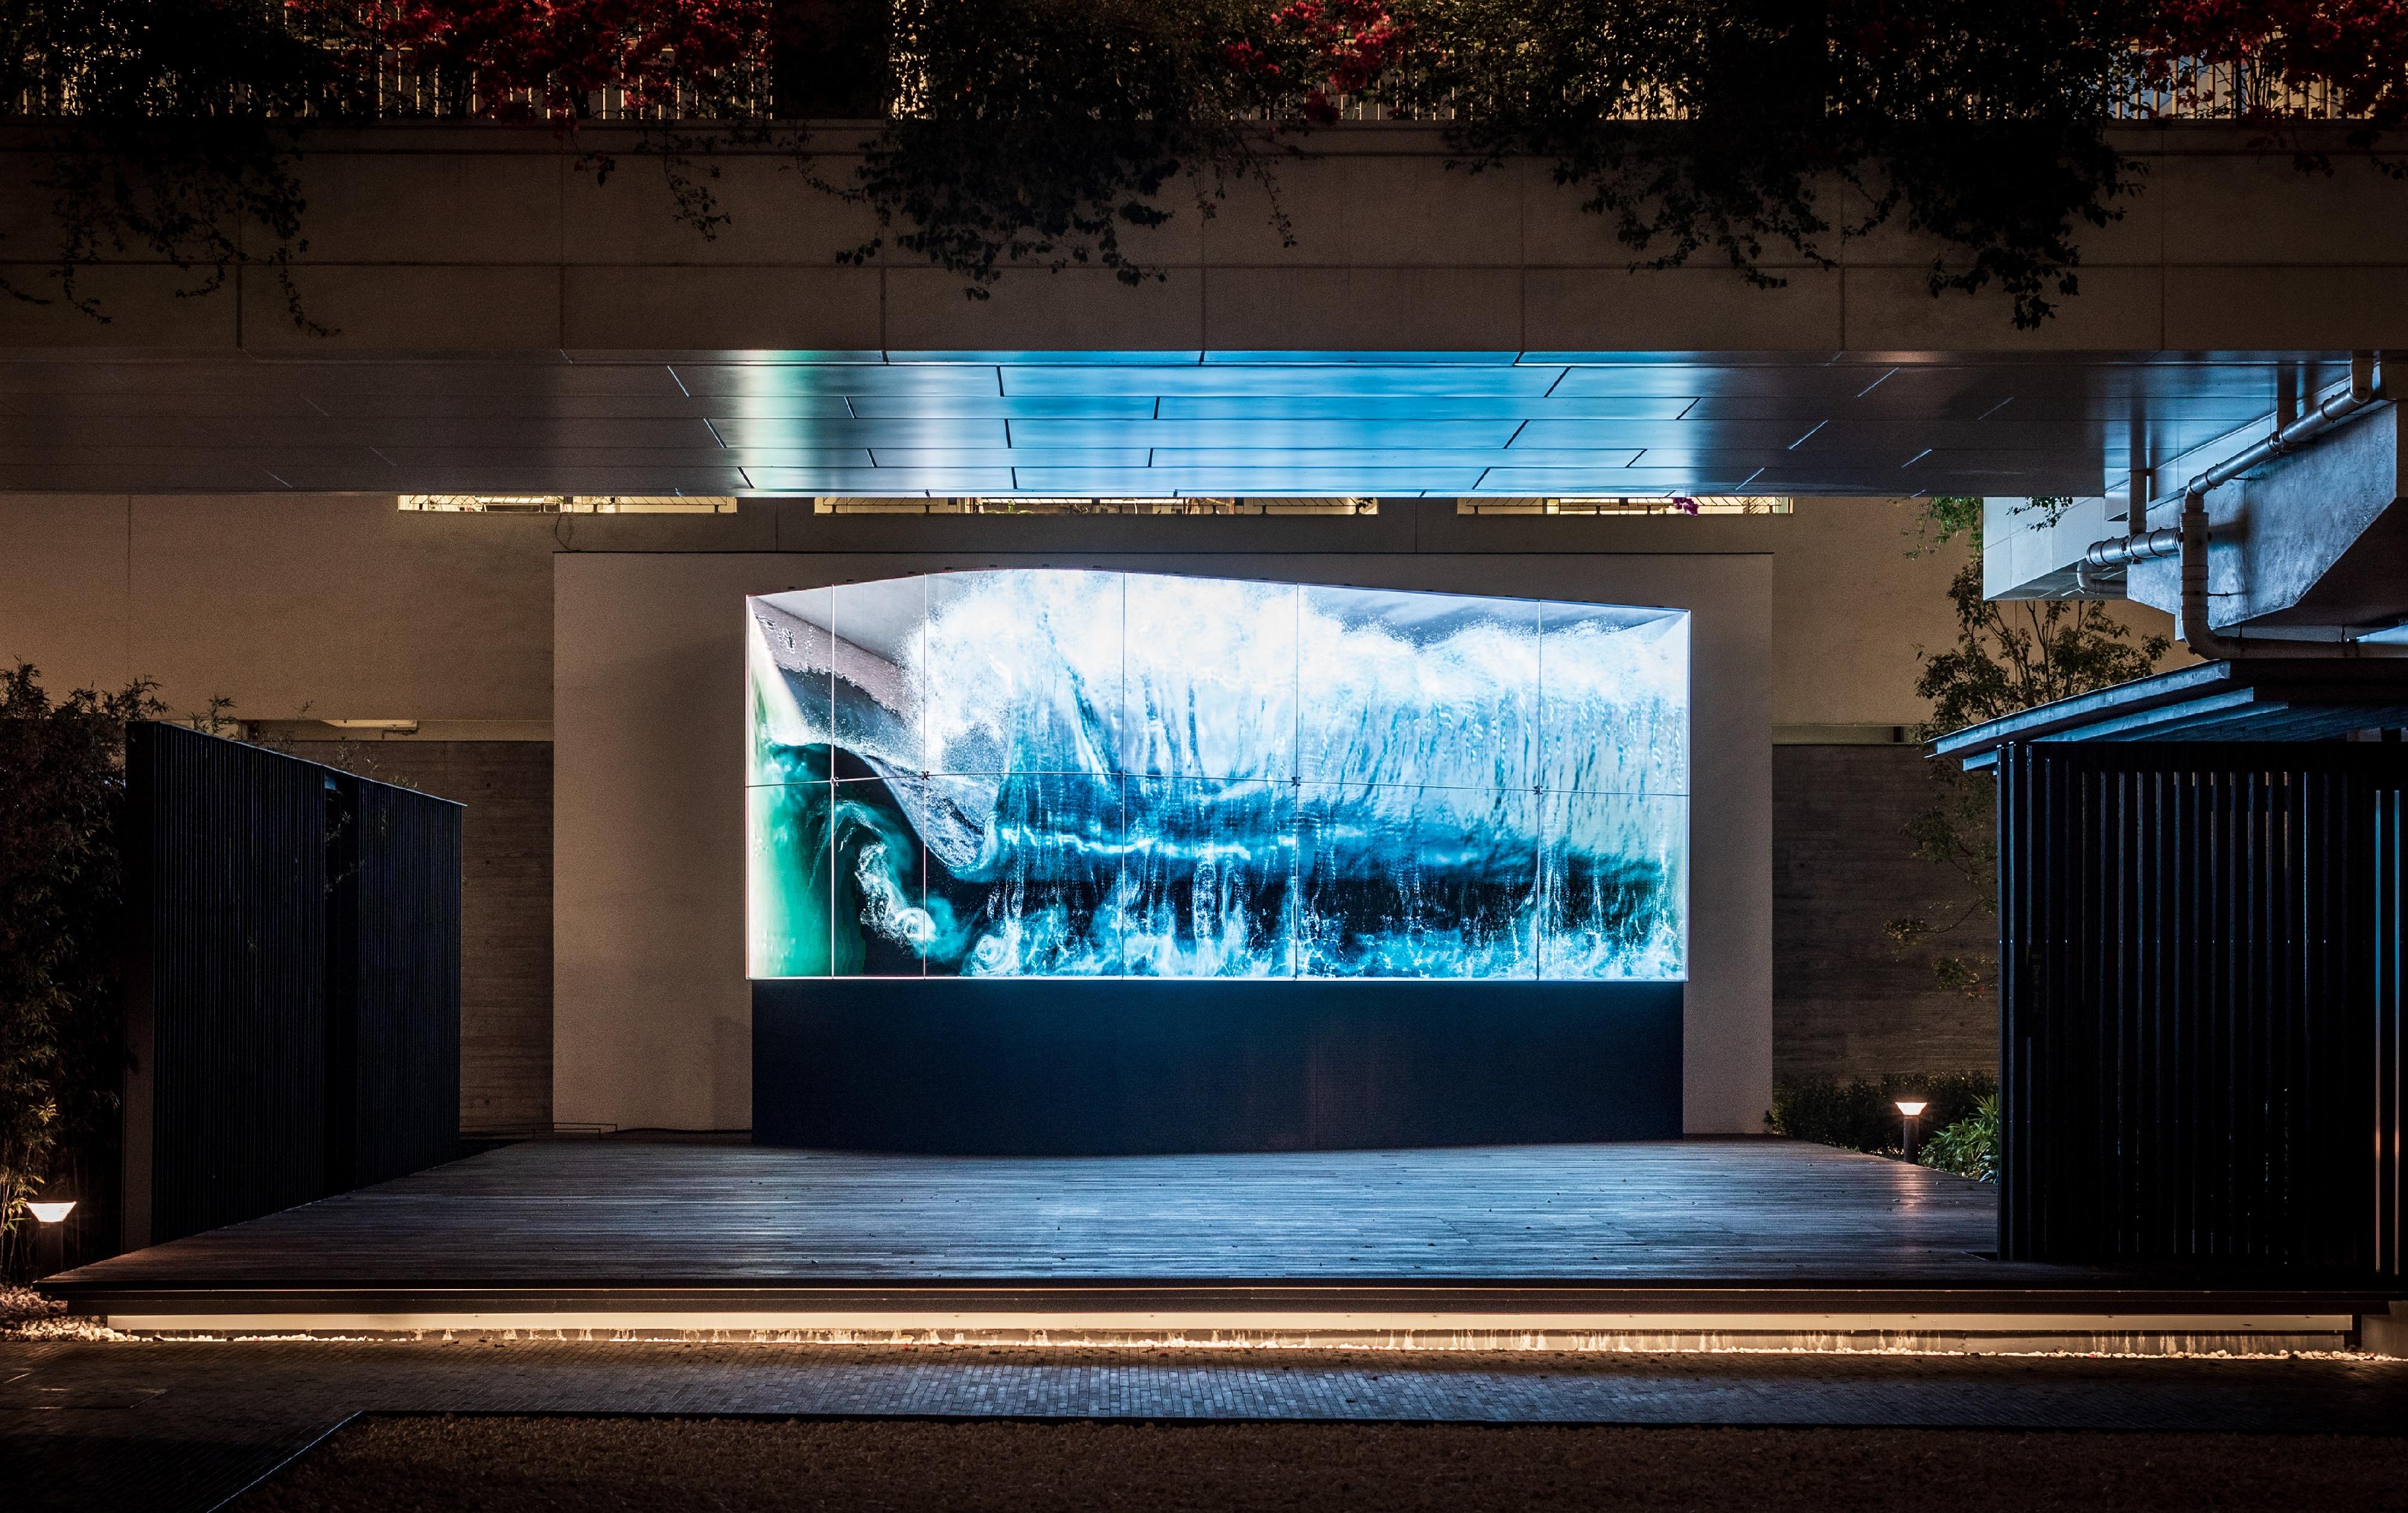 The new extension of the Oil Street Art Space will be open to the public tomorrow (May 24). Photo shows Korean art group d'strict's three-dimensional digital art work "Wave", which brings refreshing ocean waves straight into a forest of skyscrapers, in the "d'strict Remix" exhibition.